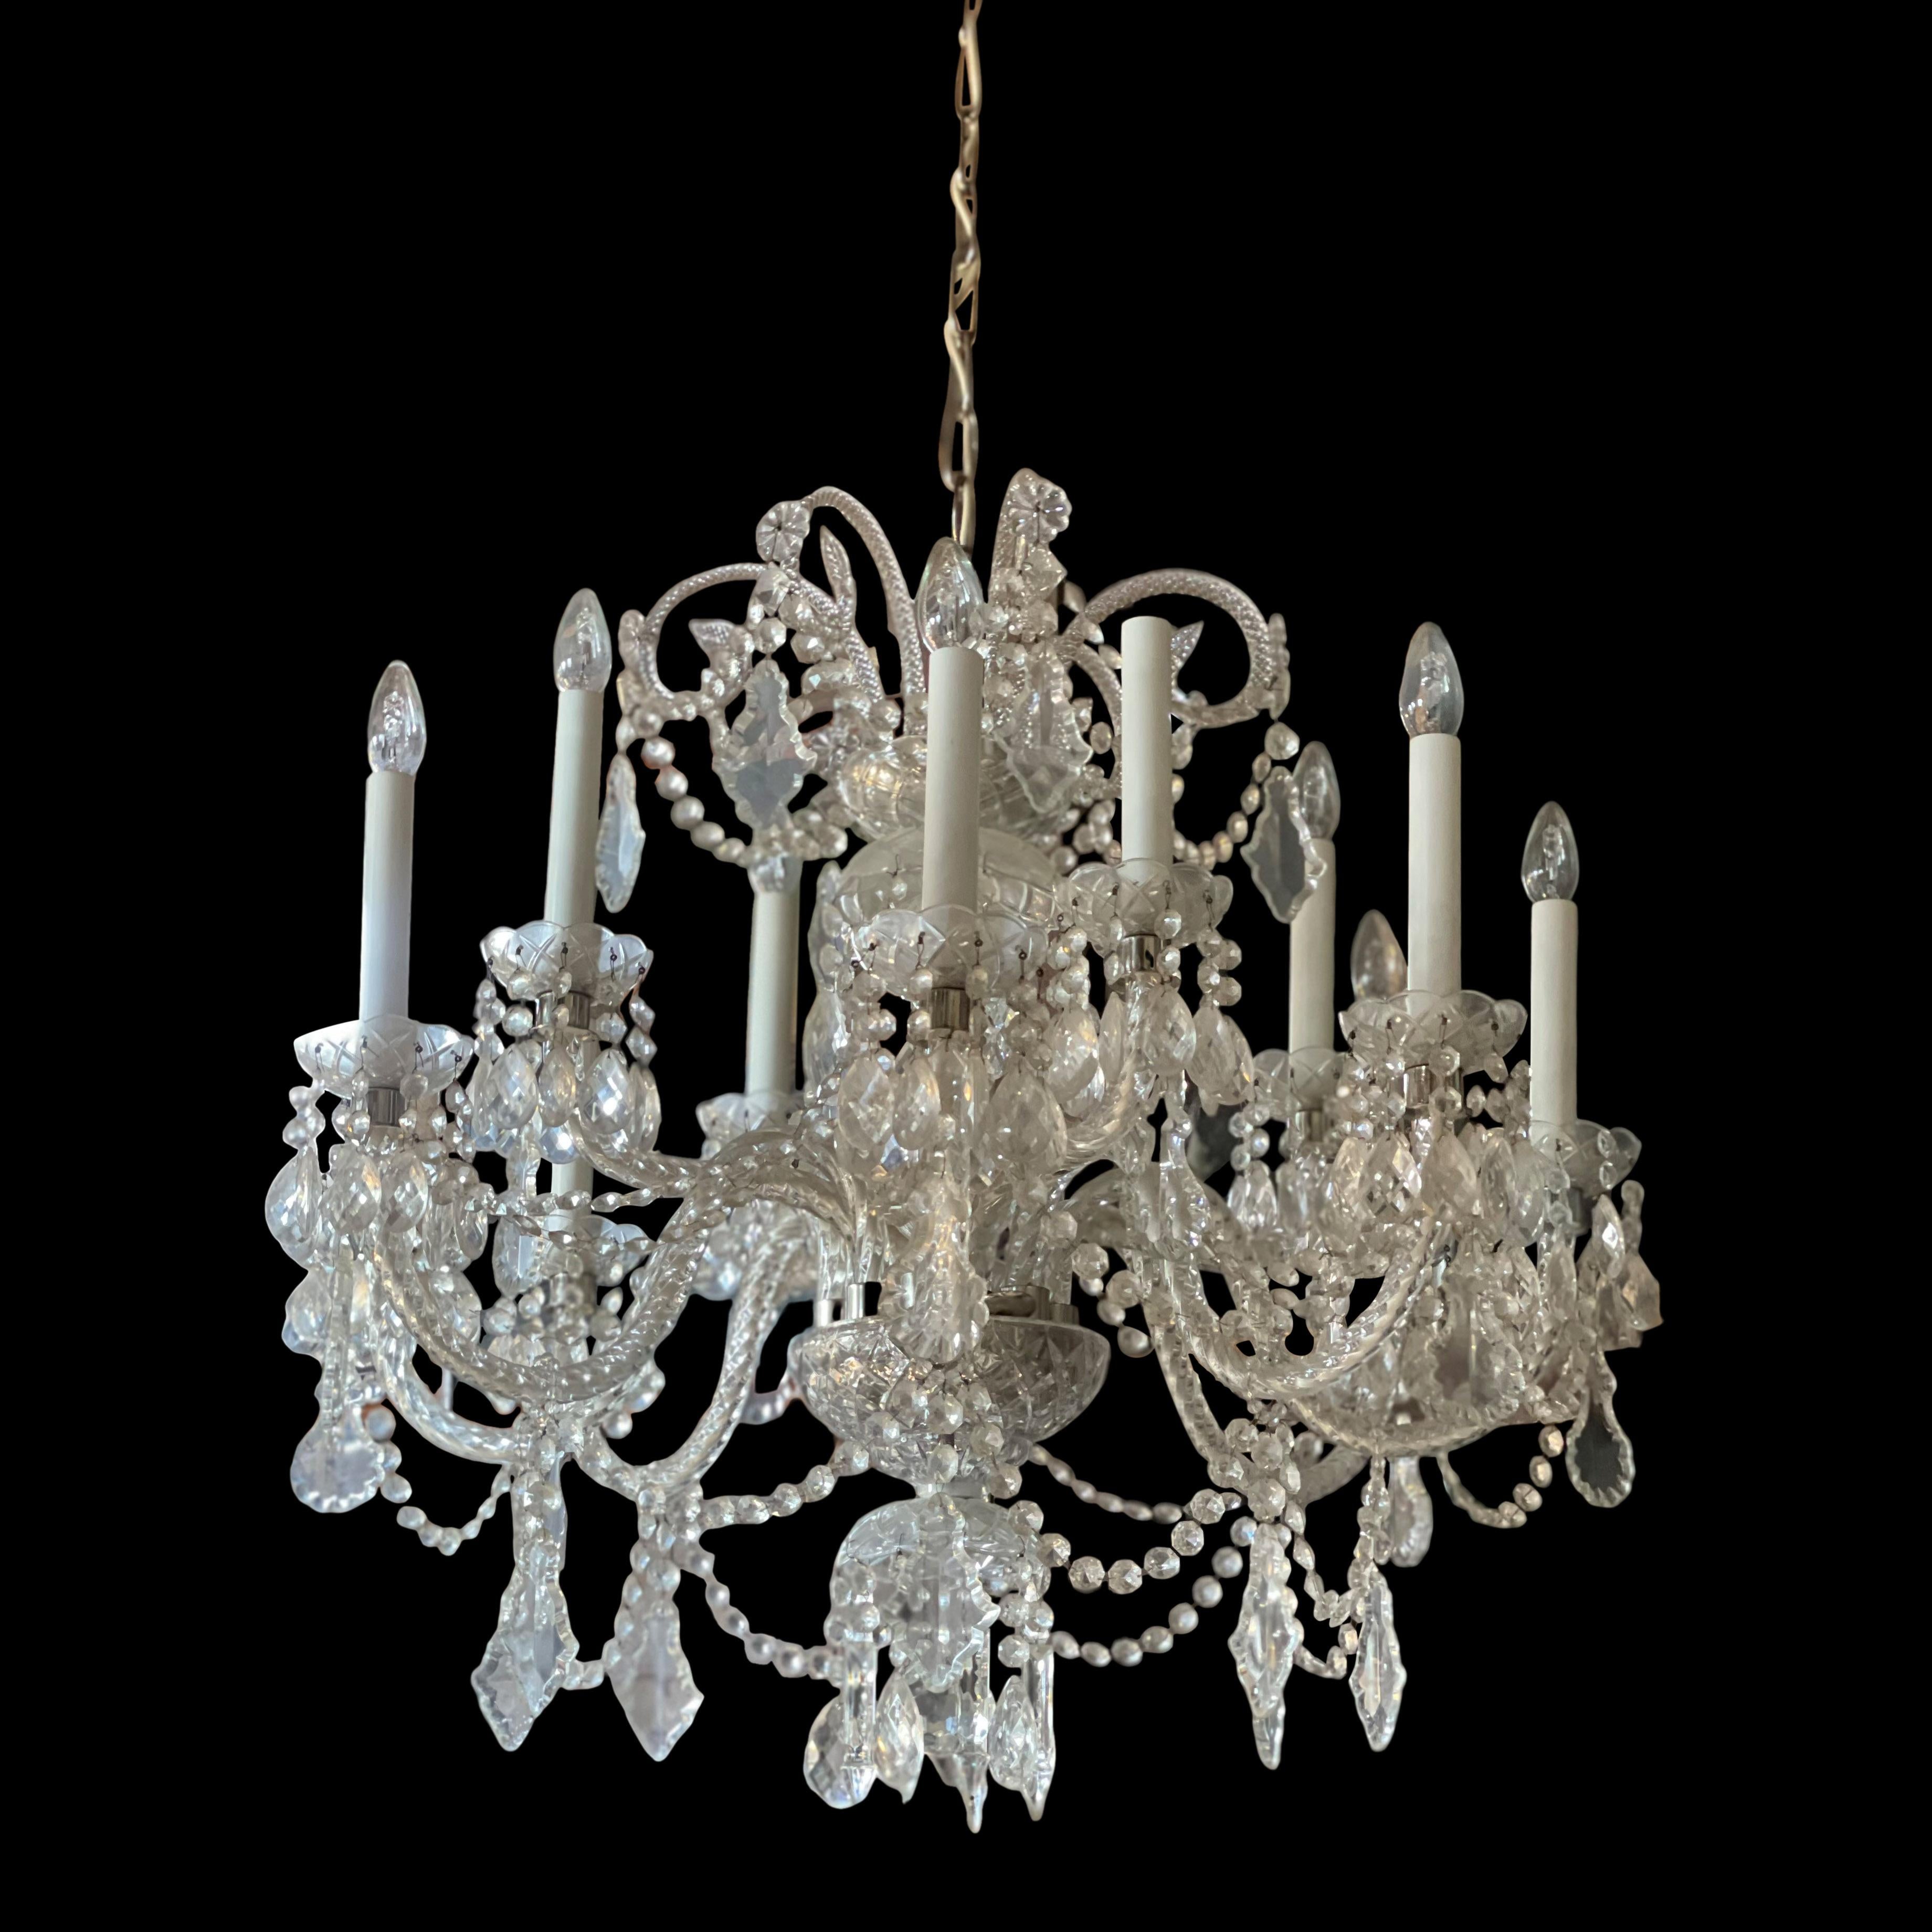 Other Pair of 20th Century Cut Glass Chandeliers For Sale